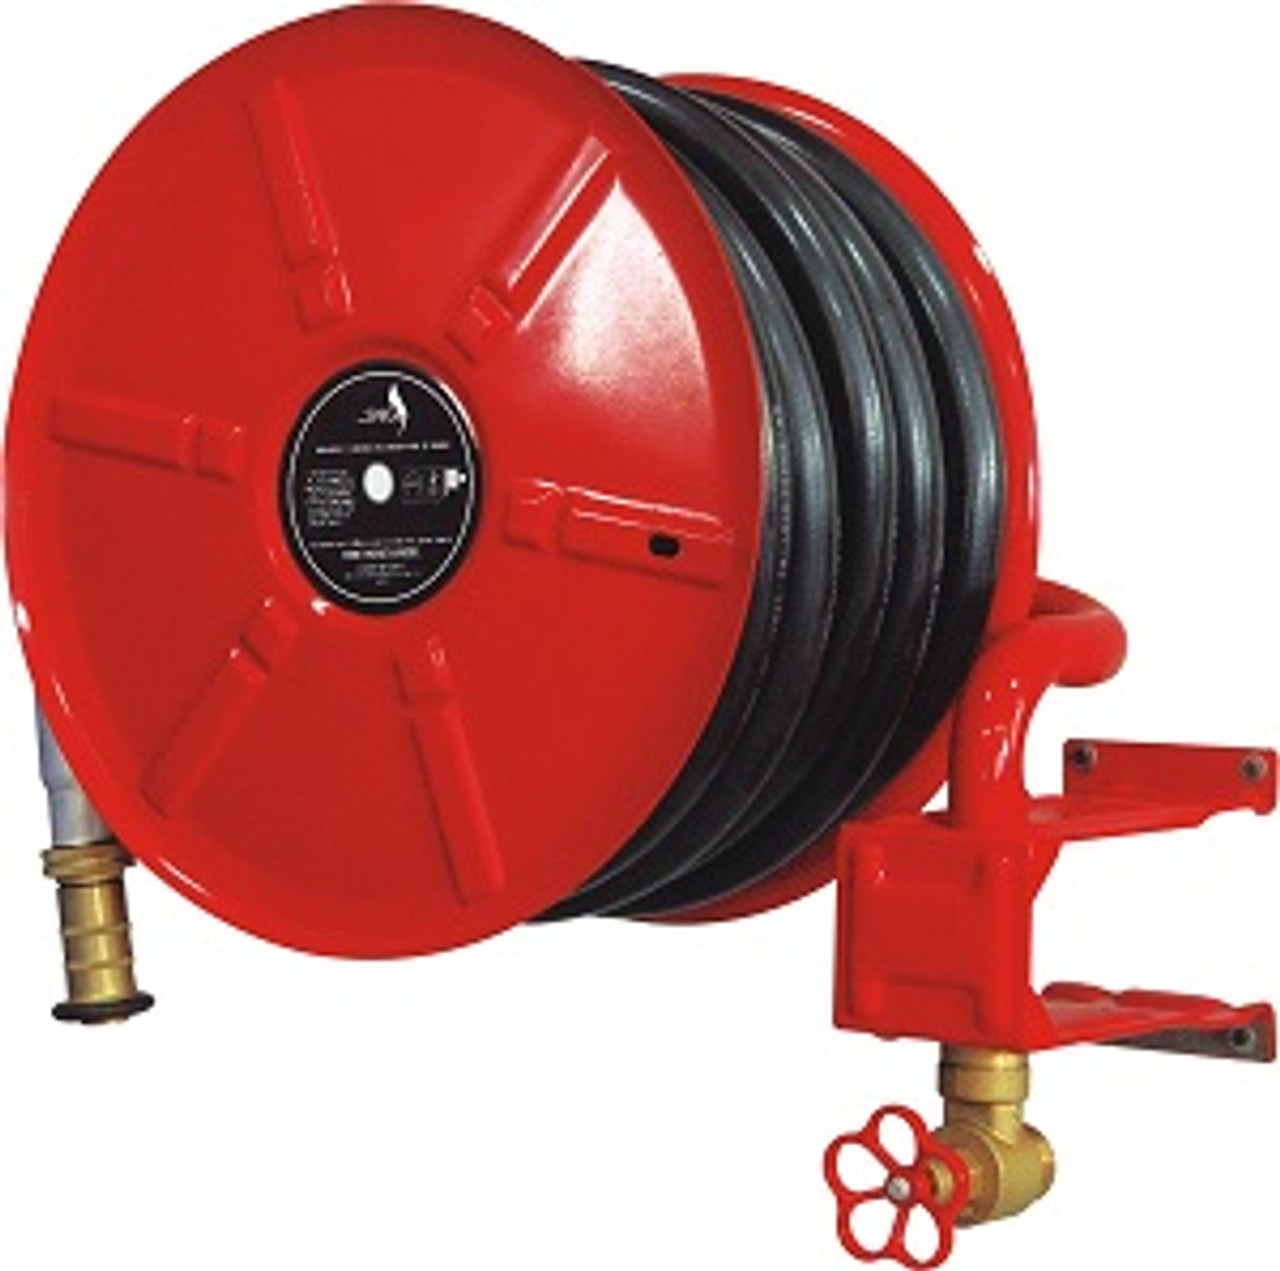 Buy Fire Hose Reel for Fire Fighting System from GZ Industrial